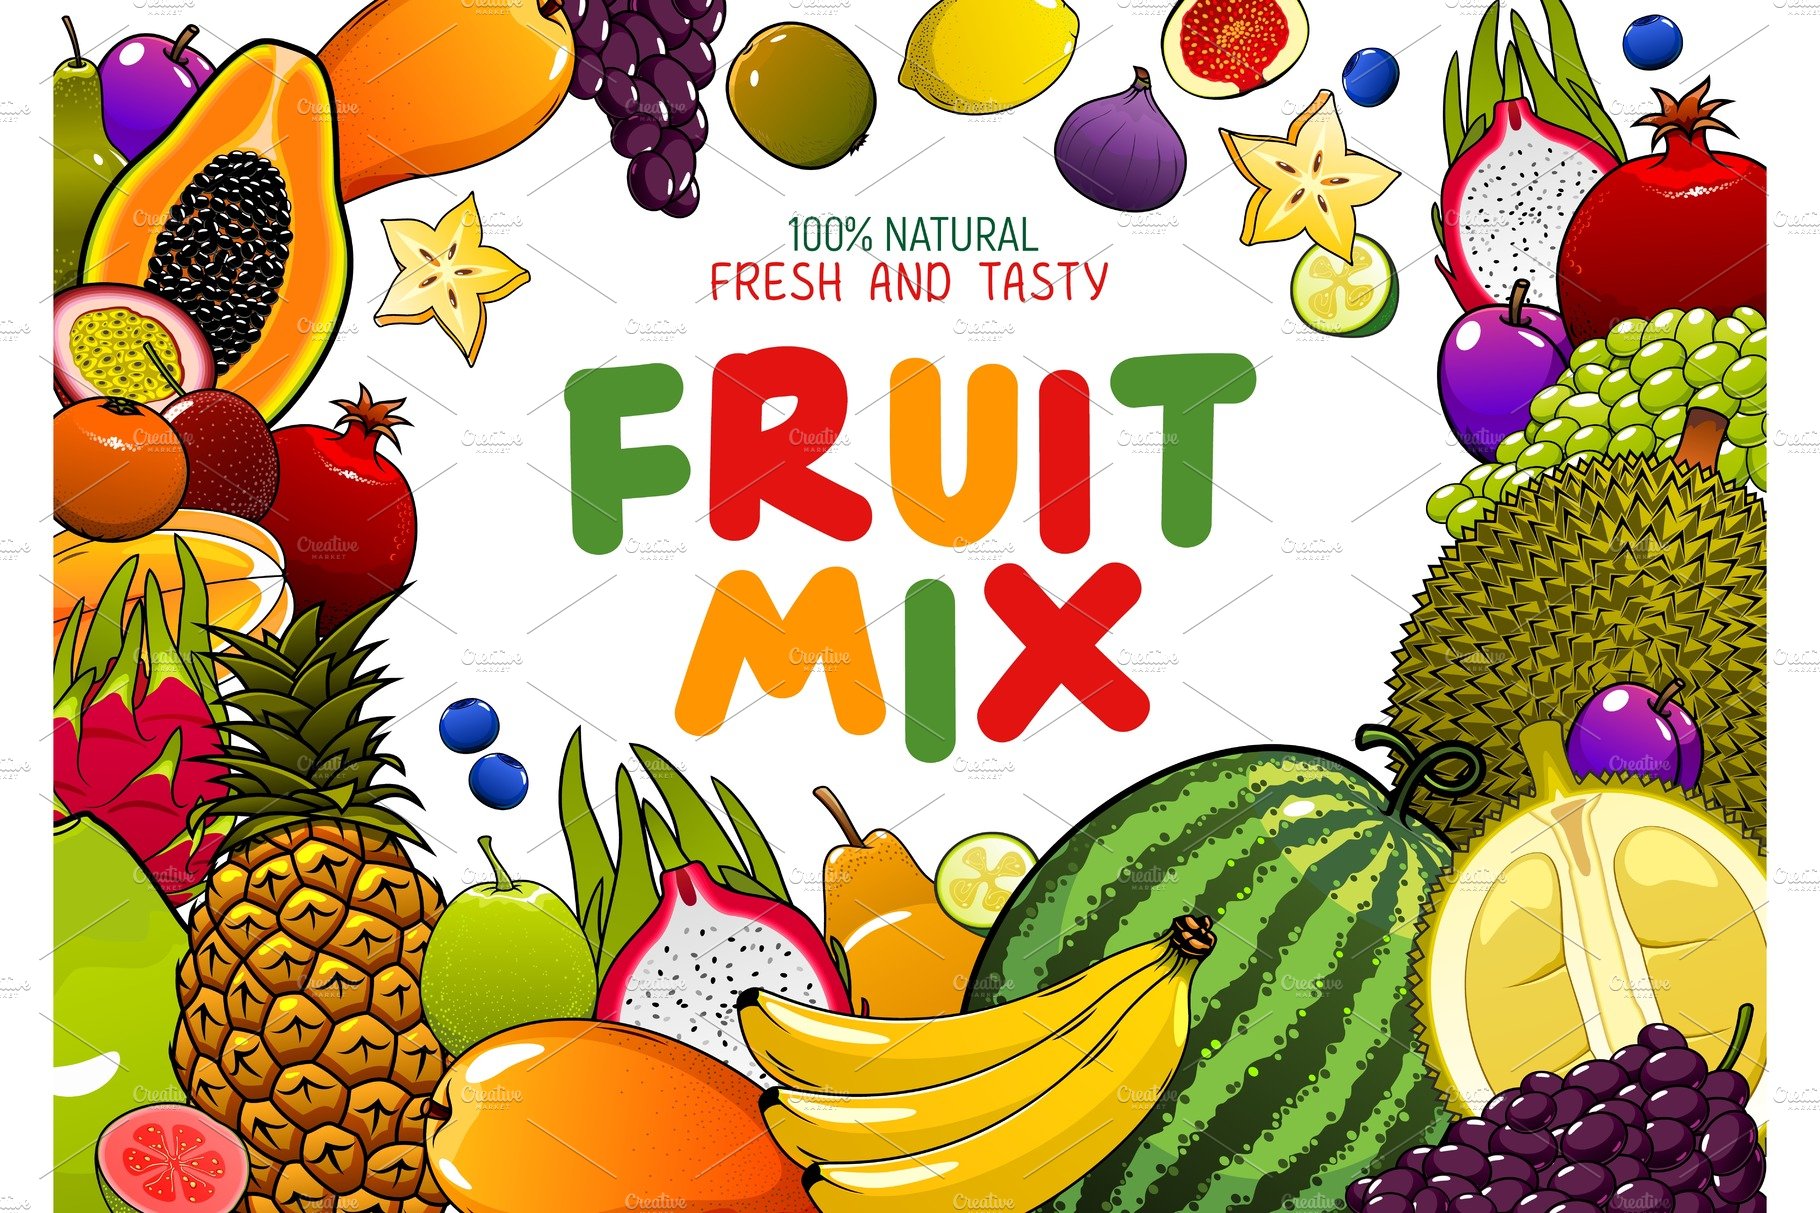 Exotic fruits, tropical mix cover image.